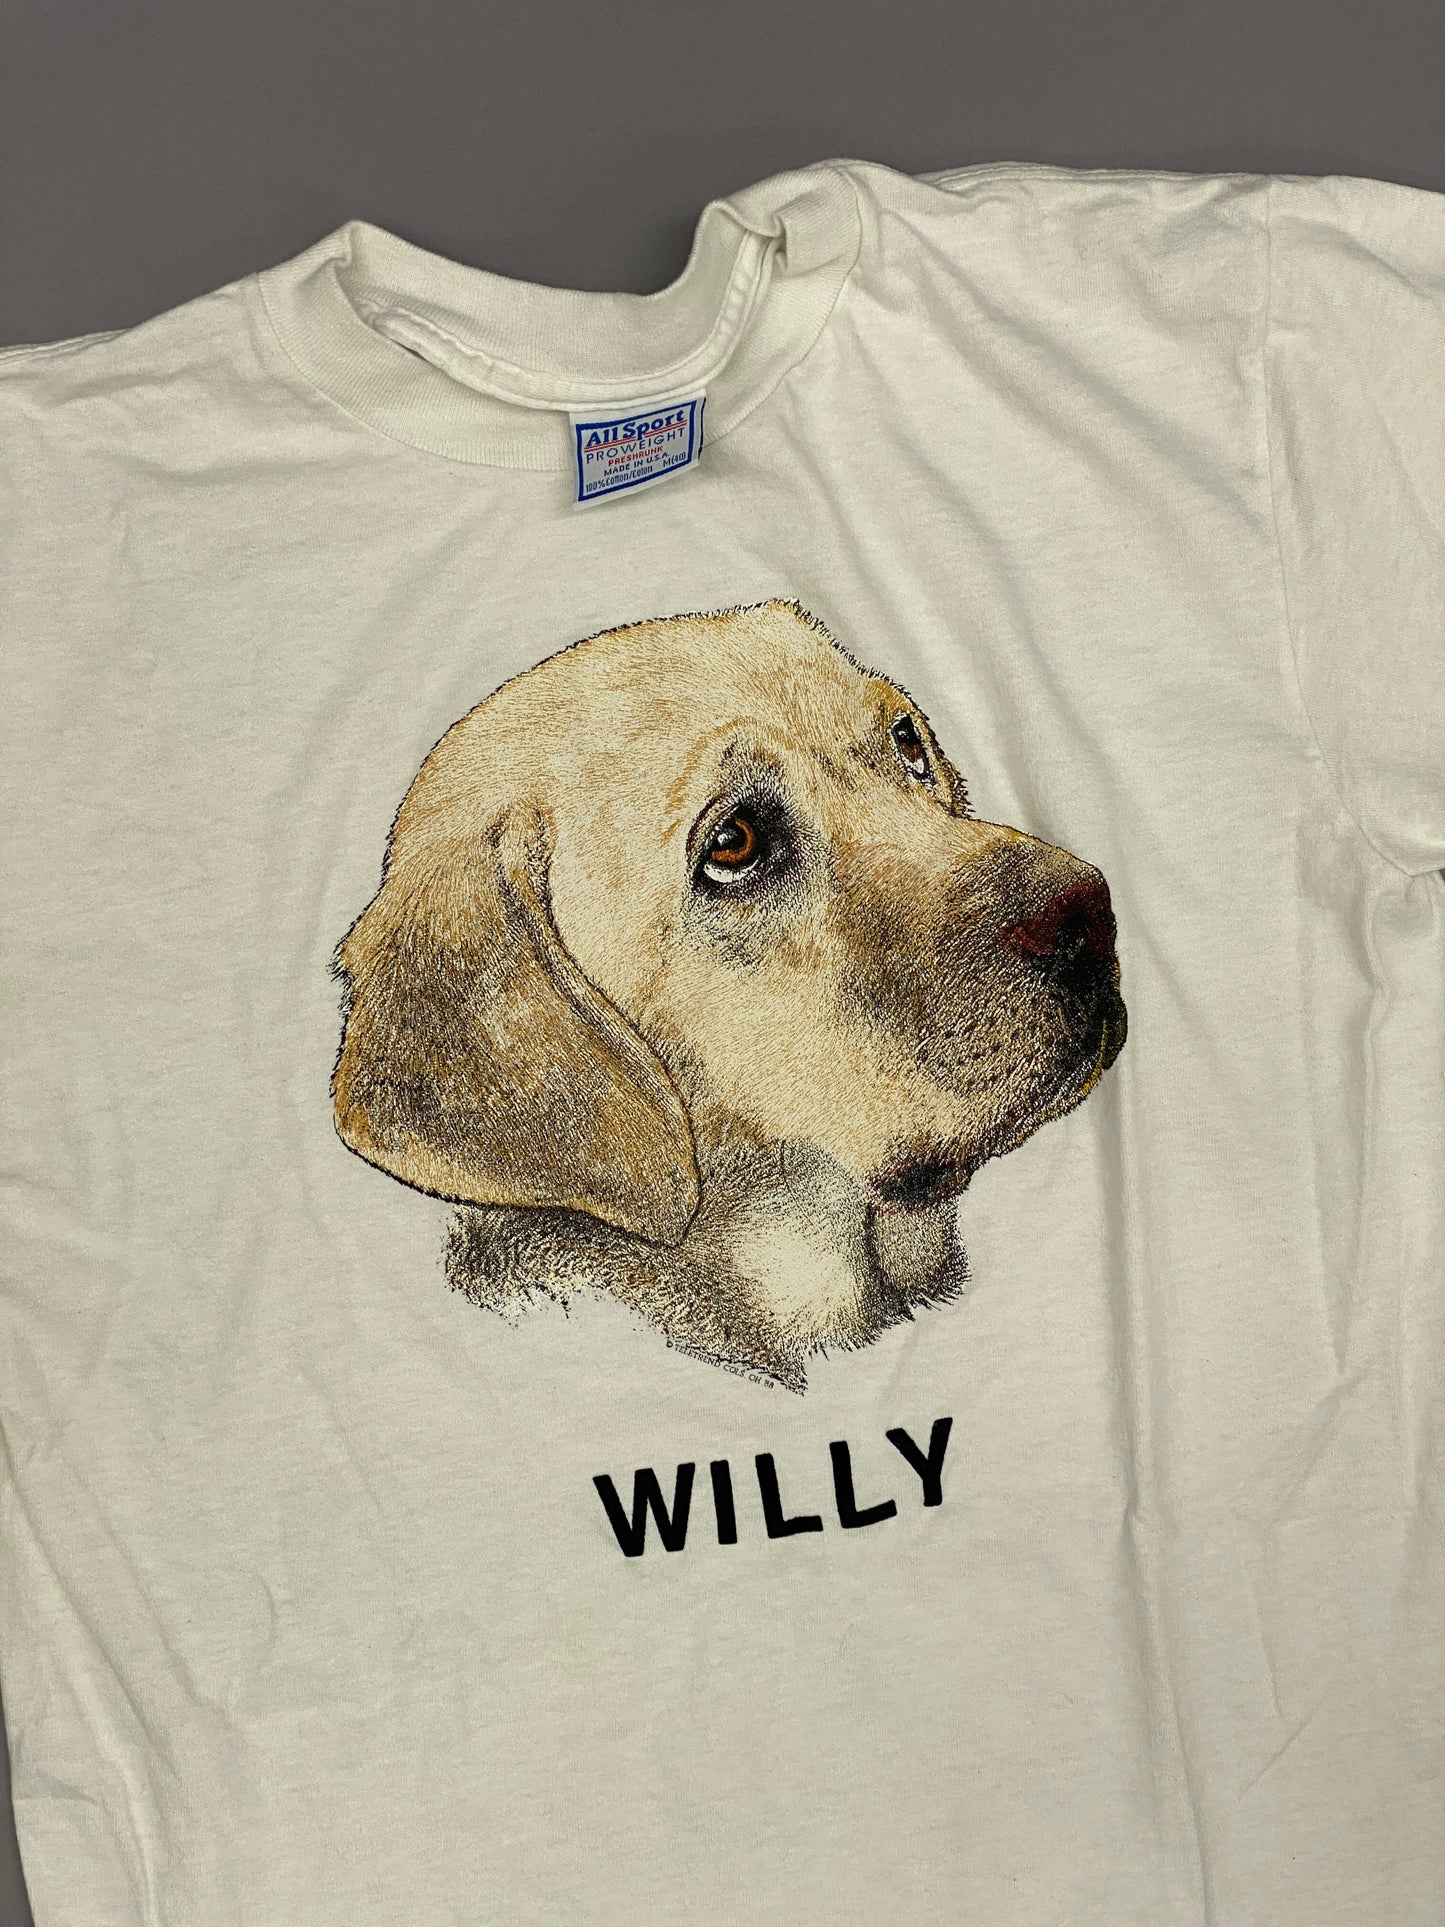 Vintage Willy T-shirt